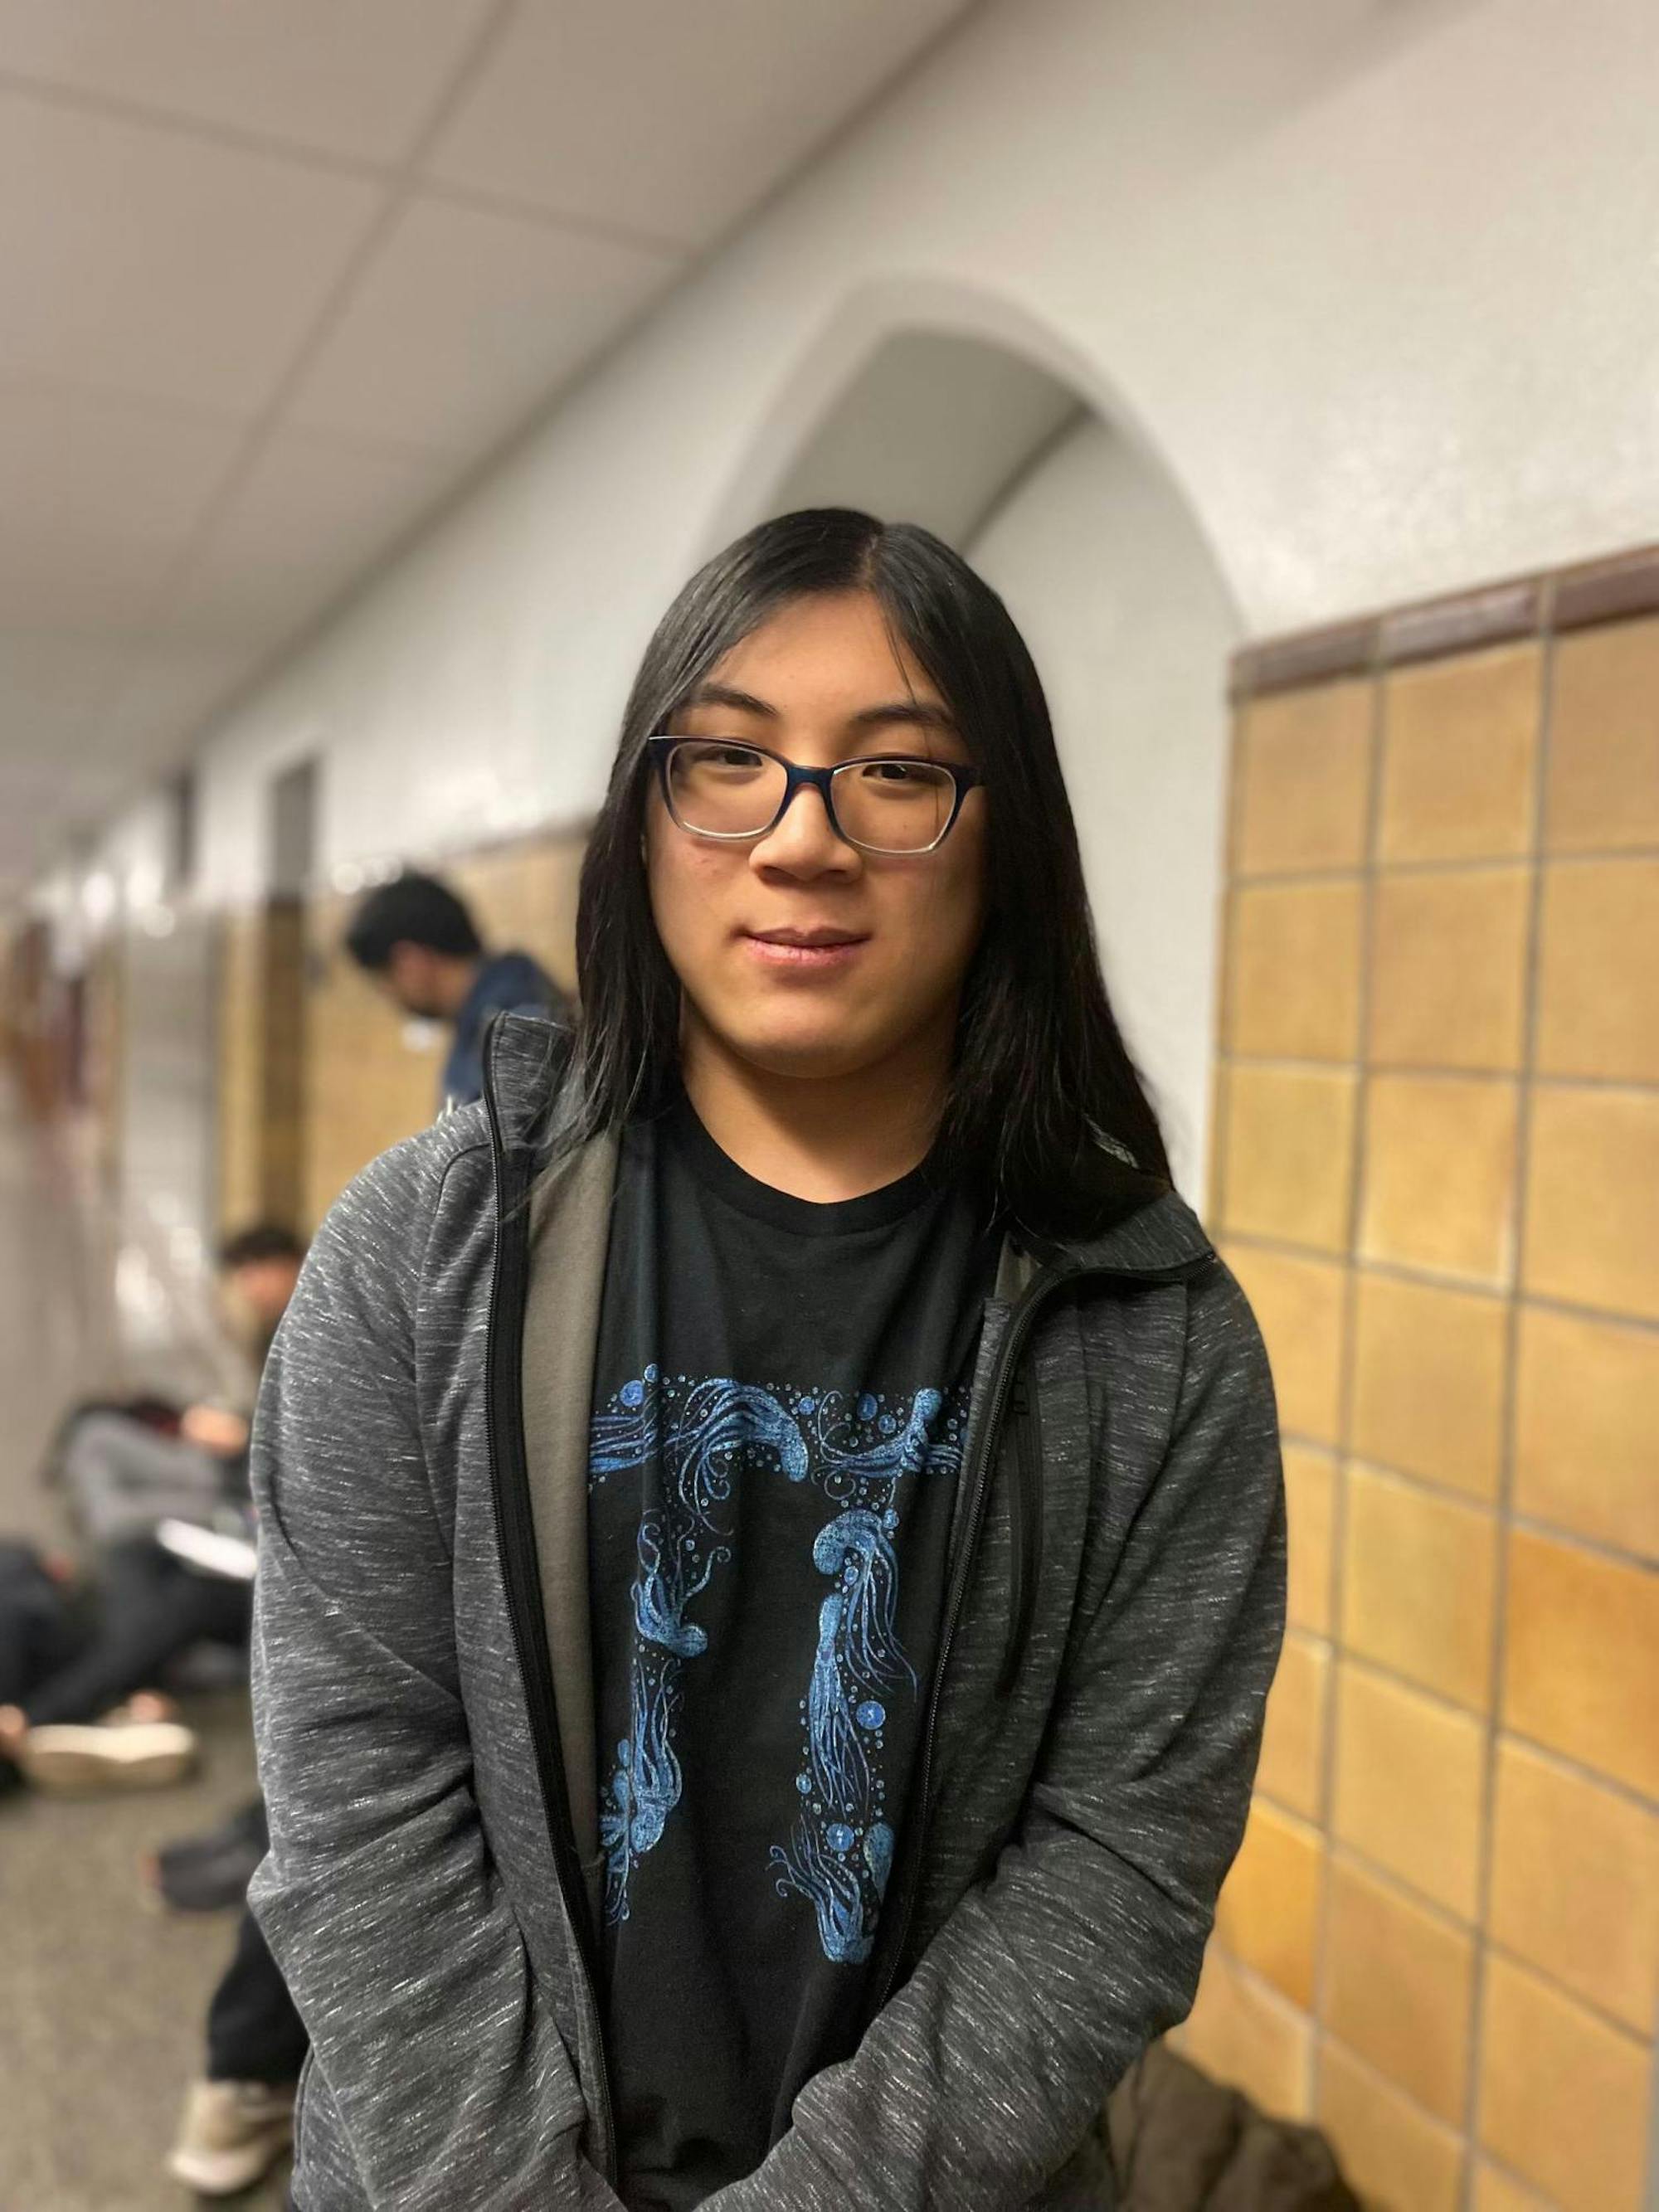 A teenager with glasses and a gray sweatshirt stands in a hallway with brown tiled walls